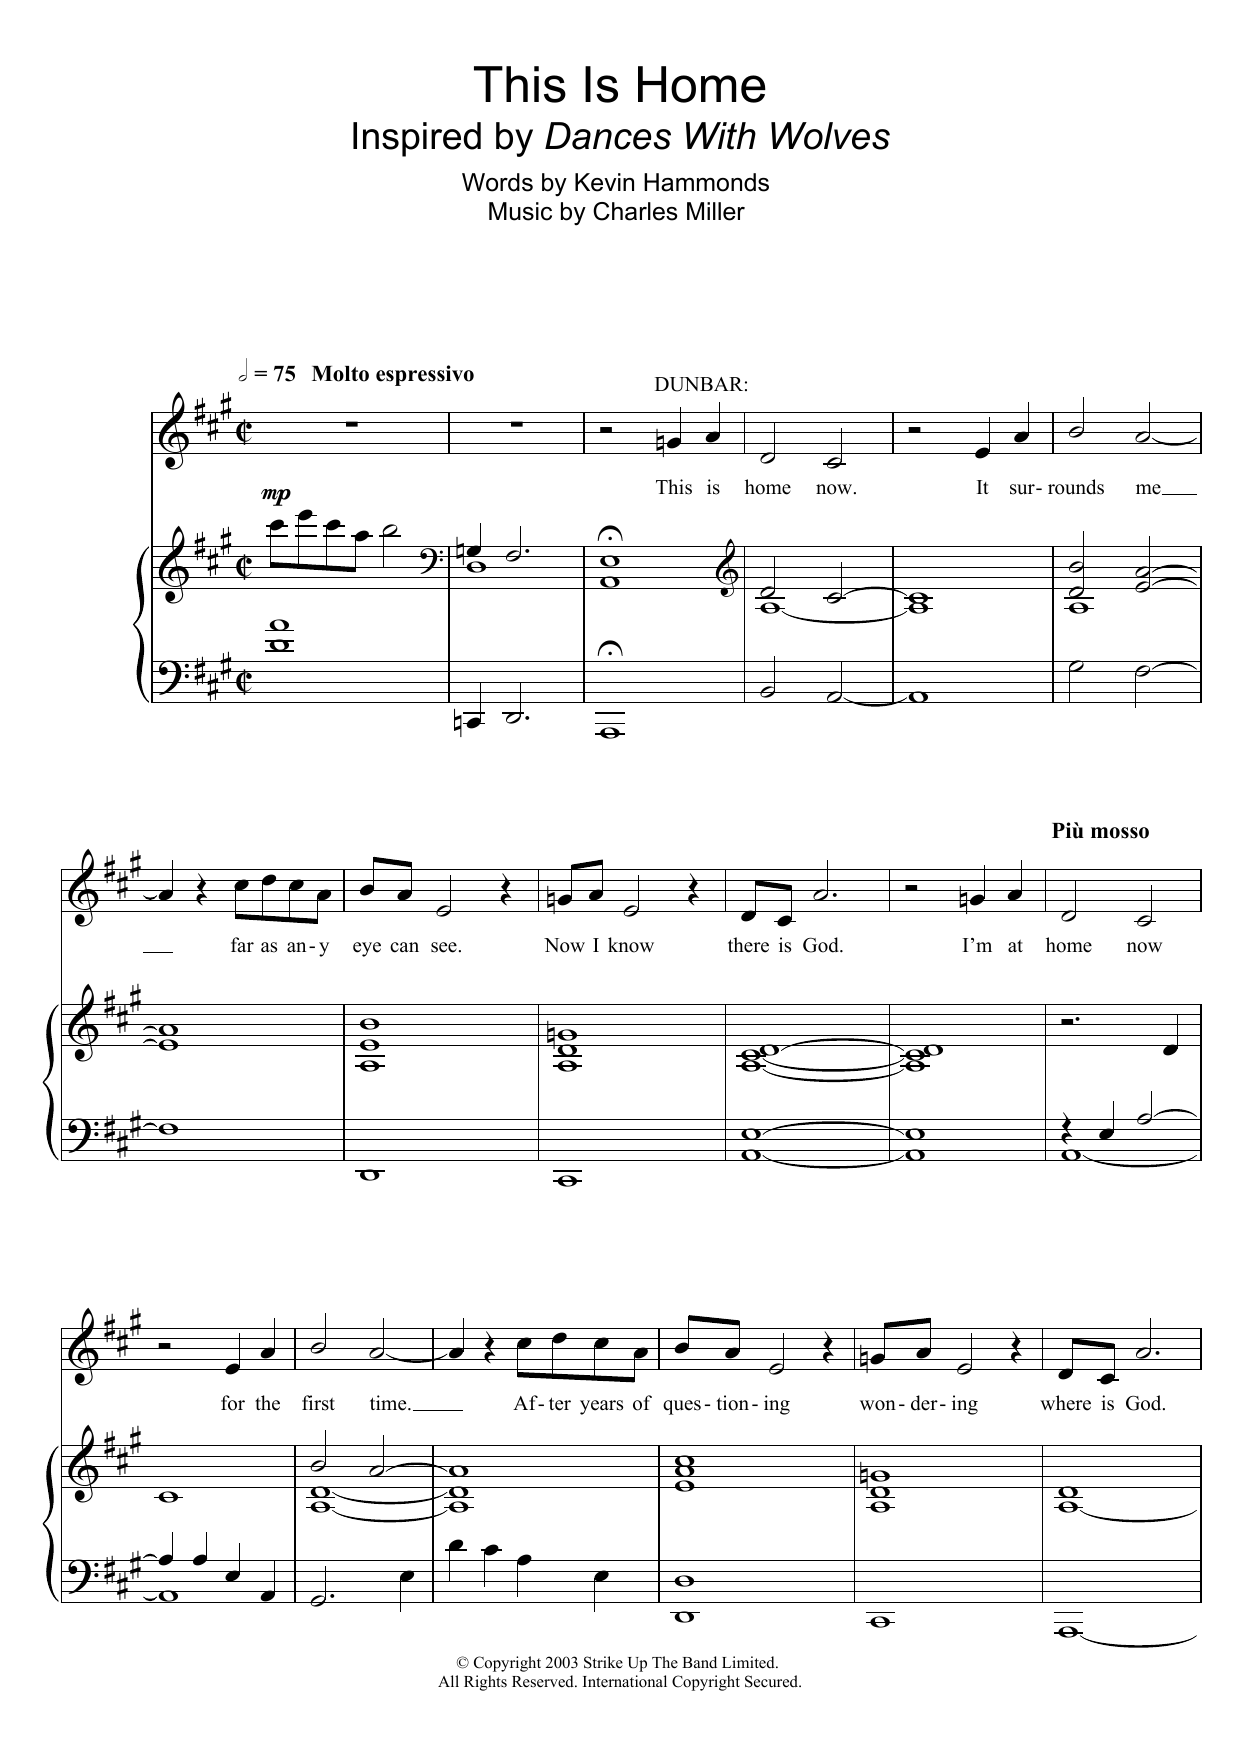 Download Charles Miller & Kevin Hammonds This Is Home Sheet Music